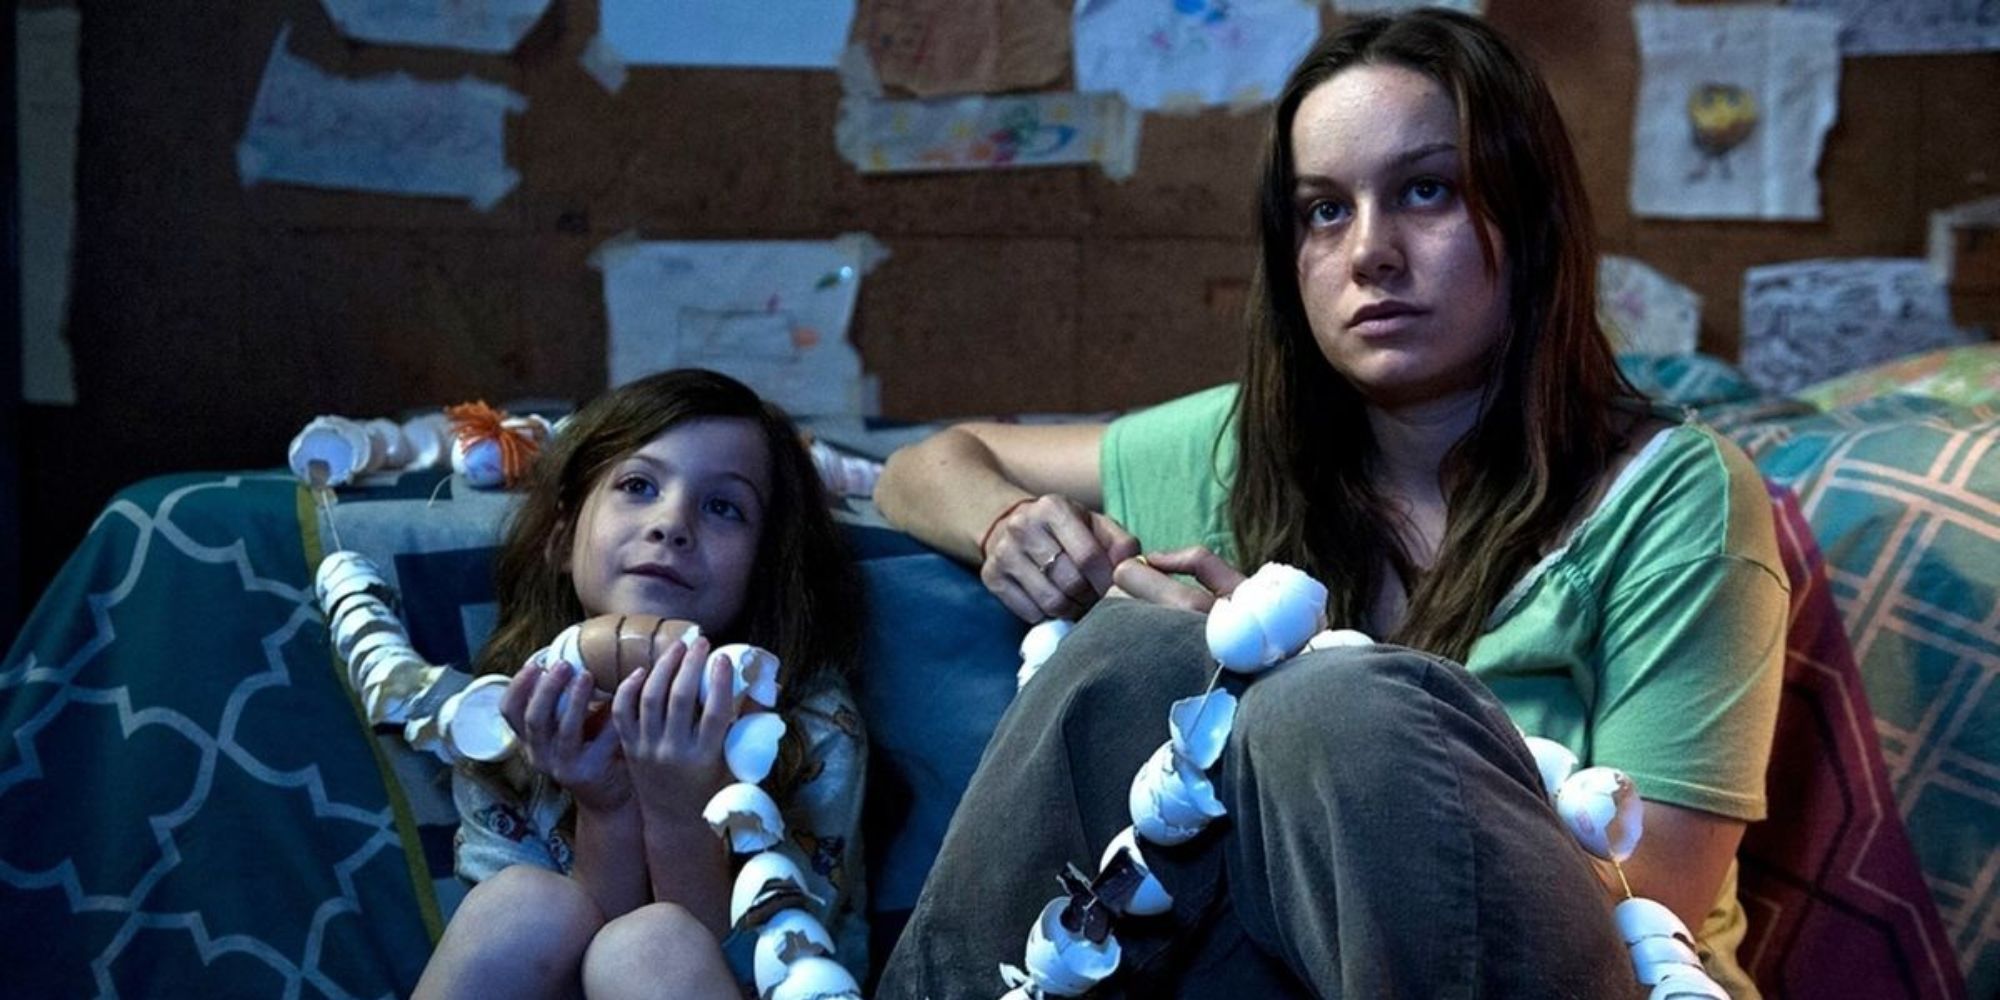 Brie Larson as Ma and Jacob Trembley as Jack in Room 